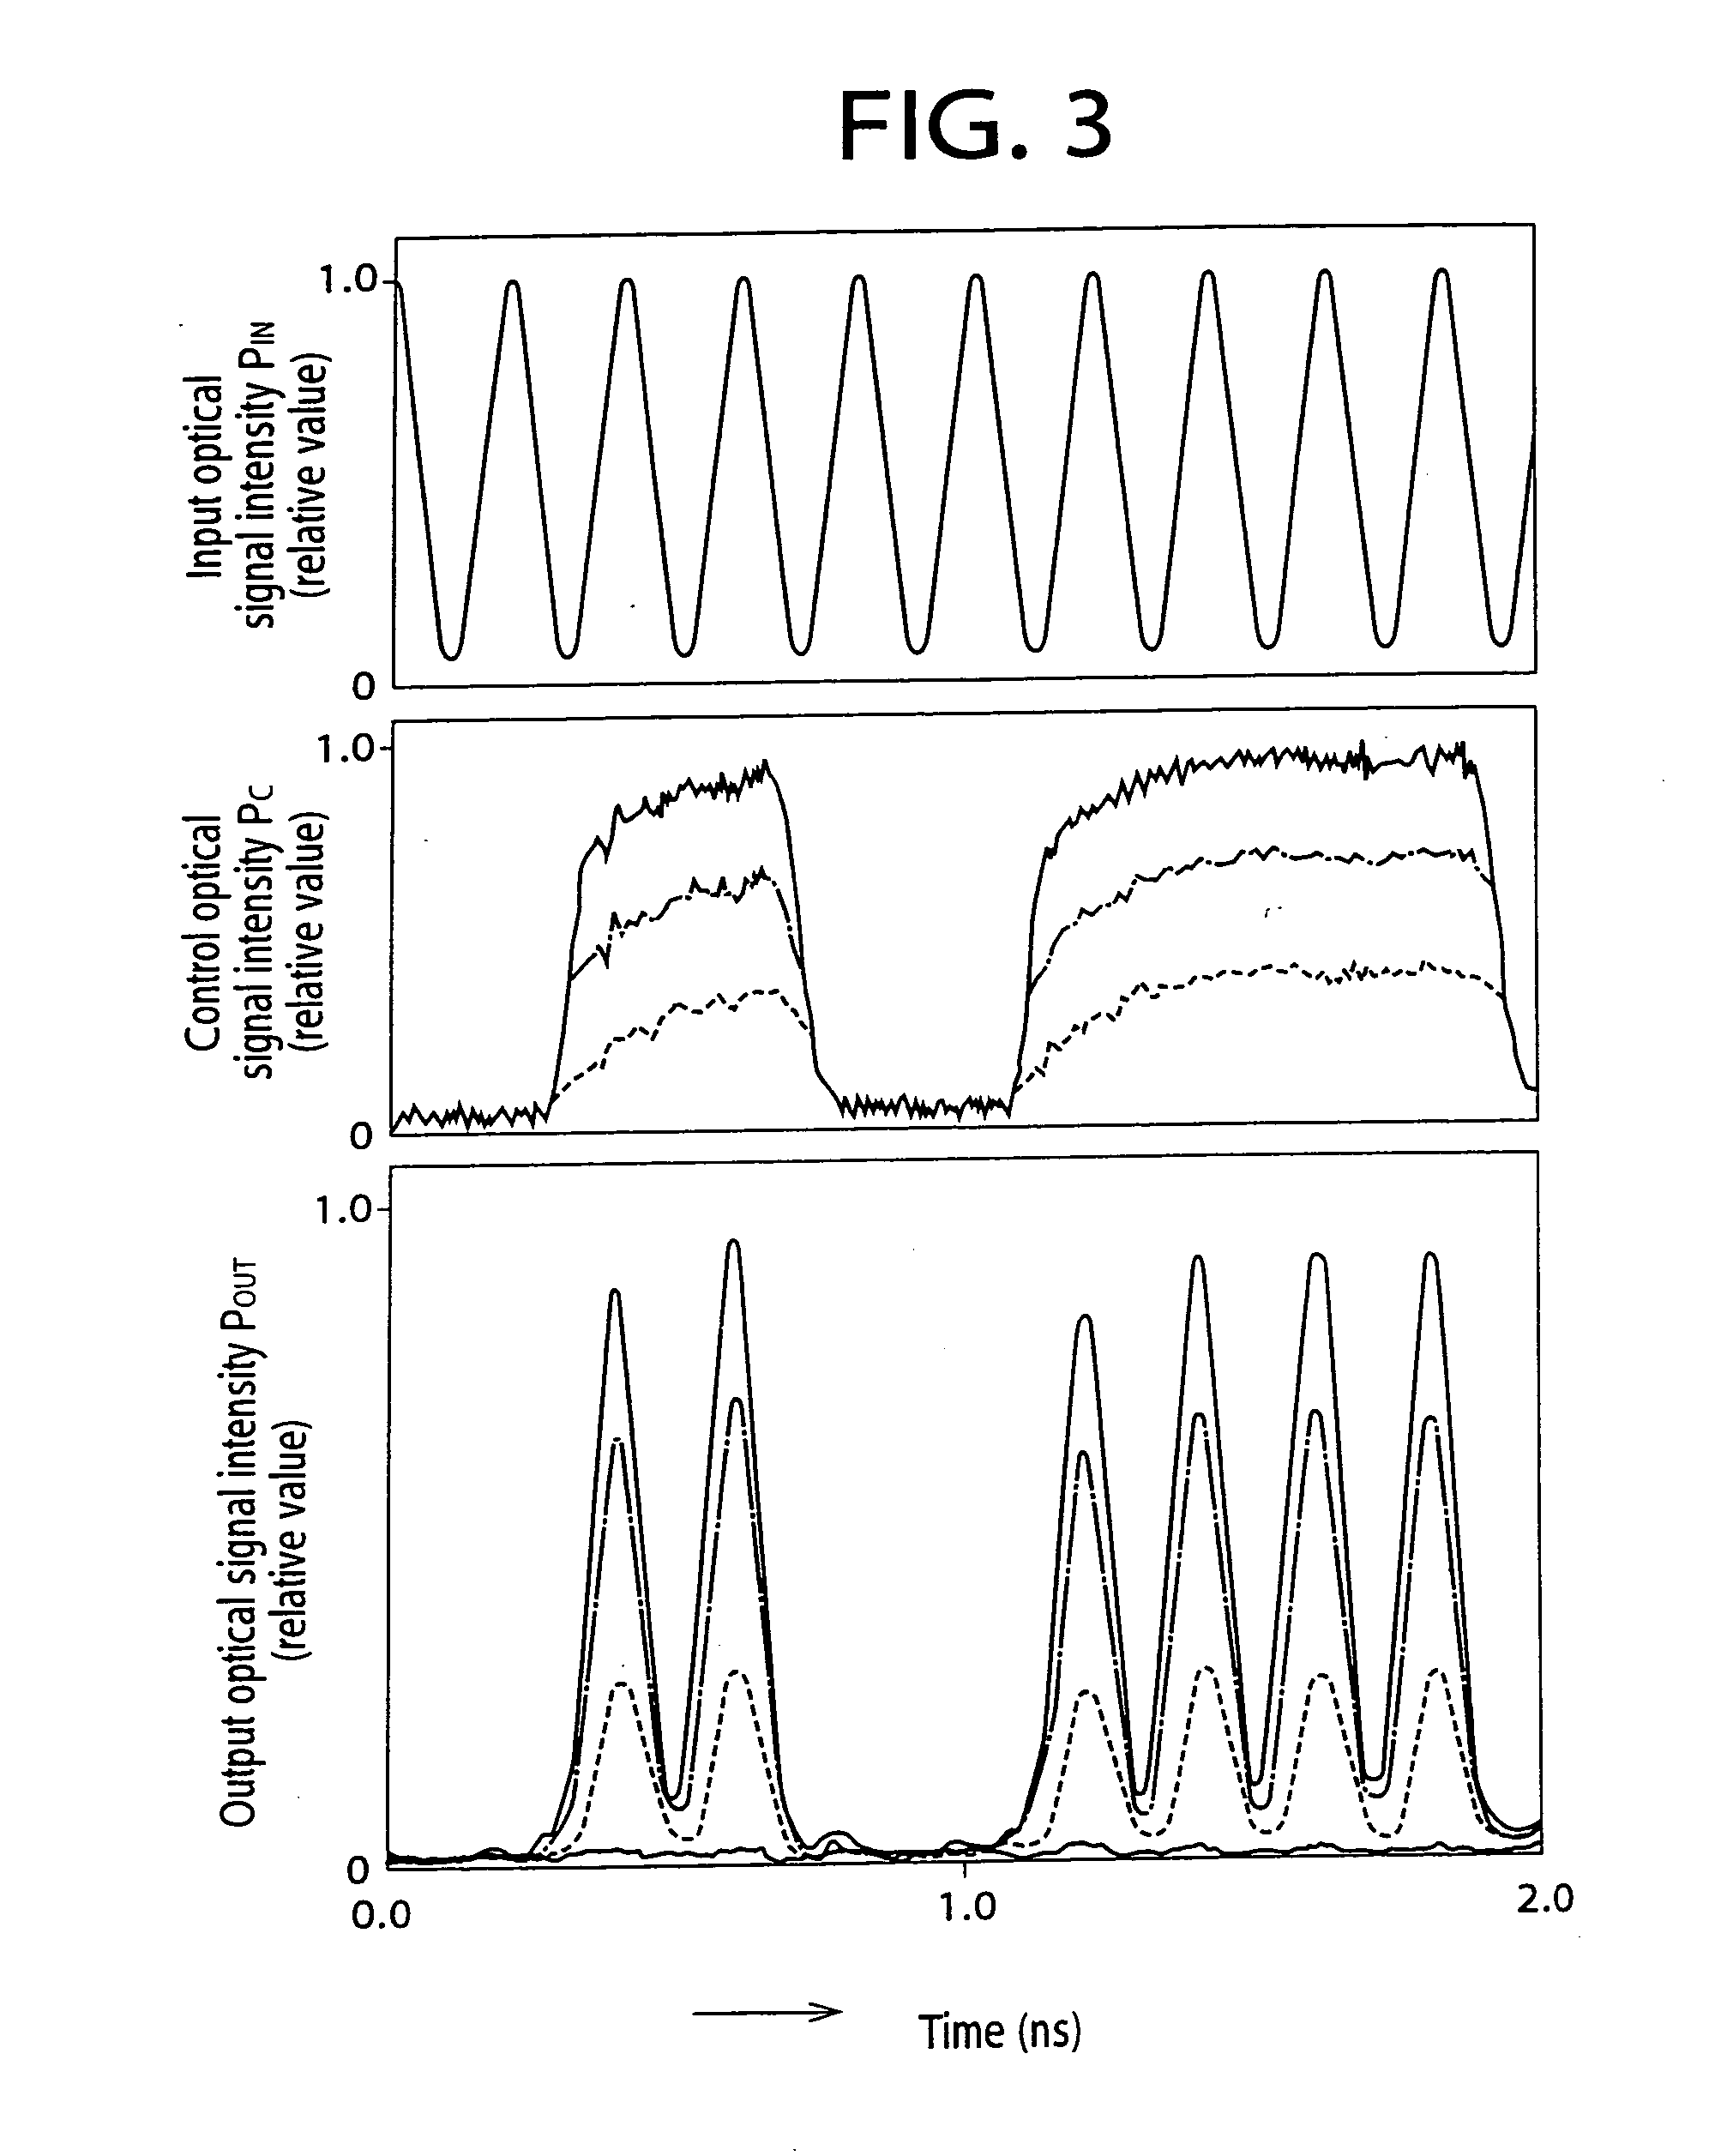 Optical Signal Amplifying Triode And Optical Signal Transfer Method, Optical Signal Relay Device, And Optical Signal Storage Device Using The Same